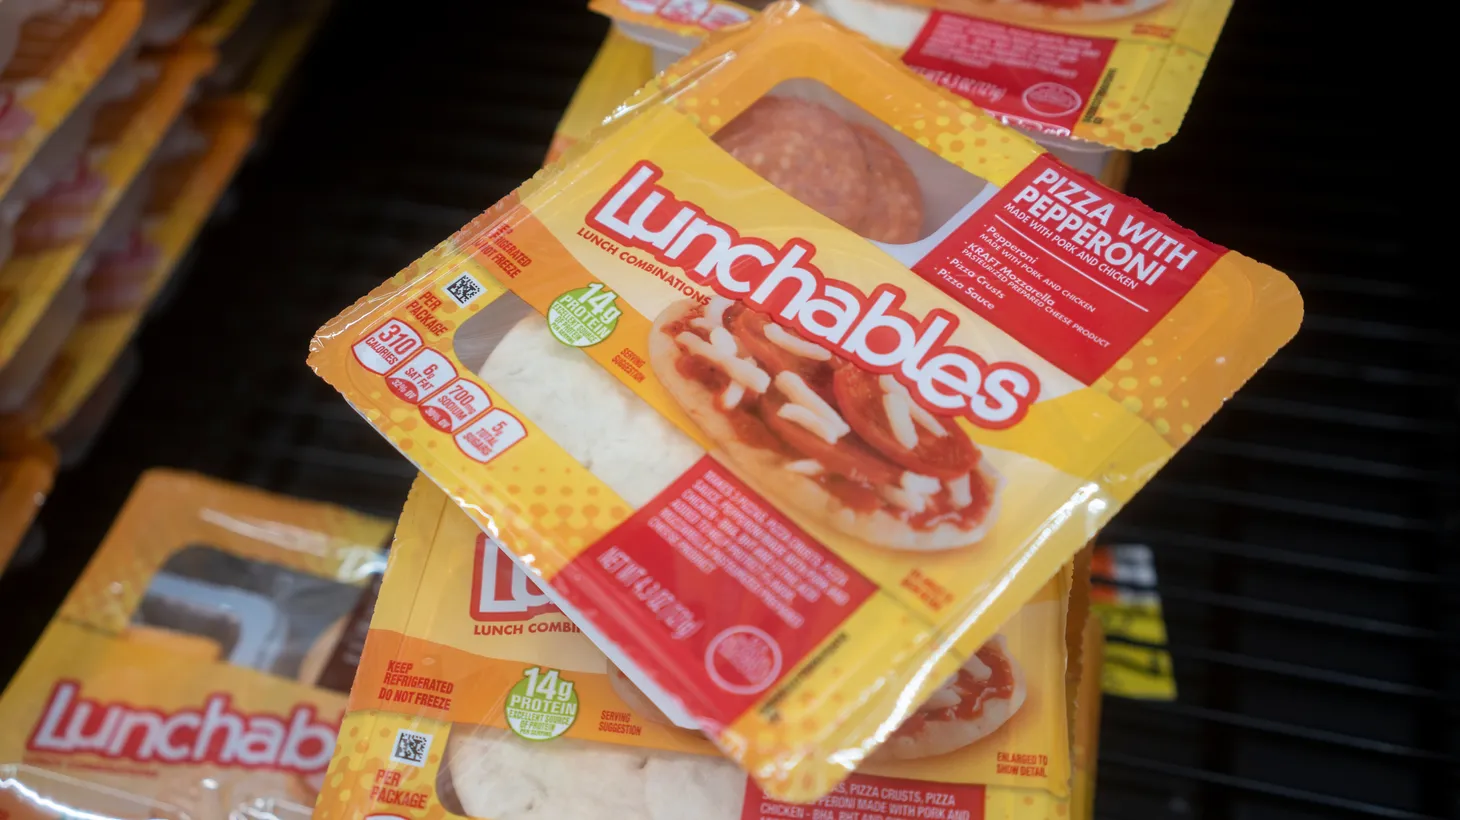 “Lunchables became this billion-dollar product … the industry knows how to tap into our deepest biology and knows that we eat for emotional reasons as much as we do kind of for pure hunger,” says Michael Moss.